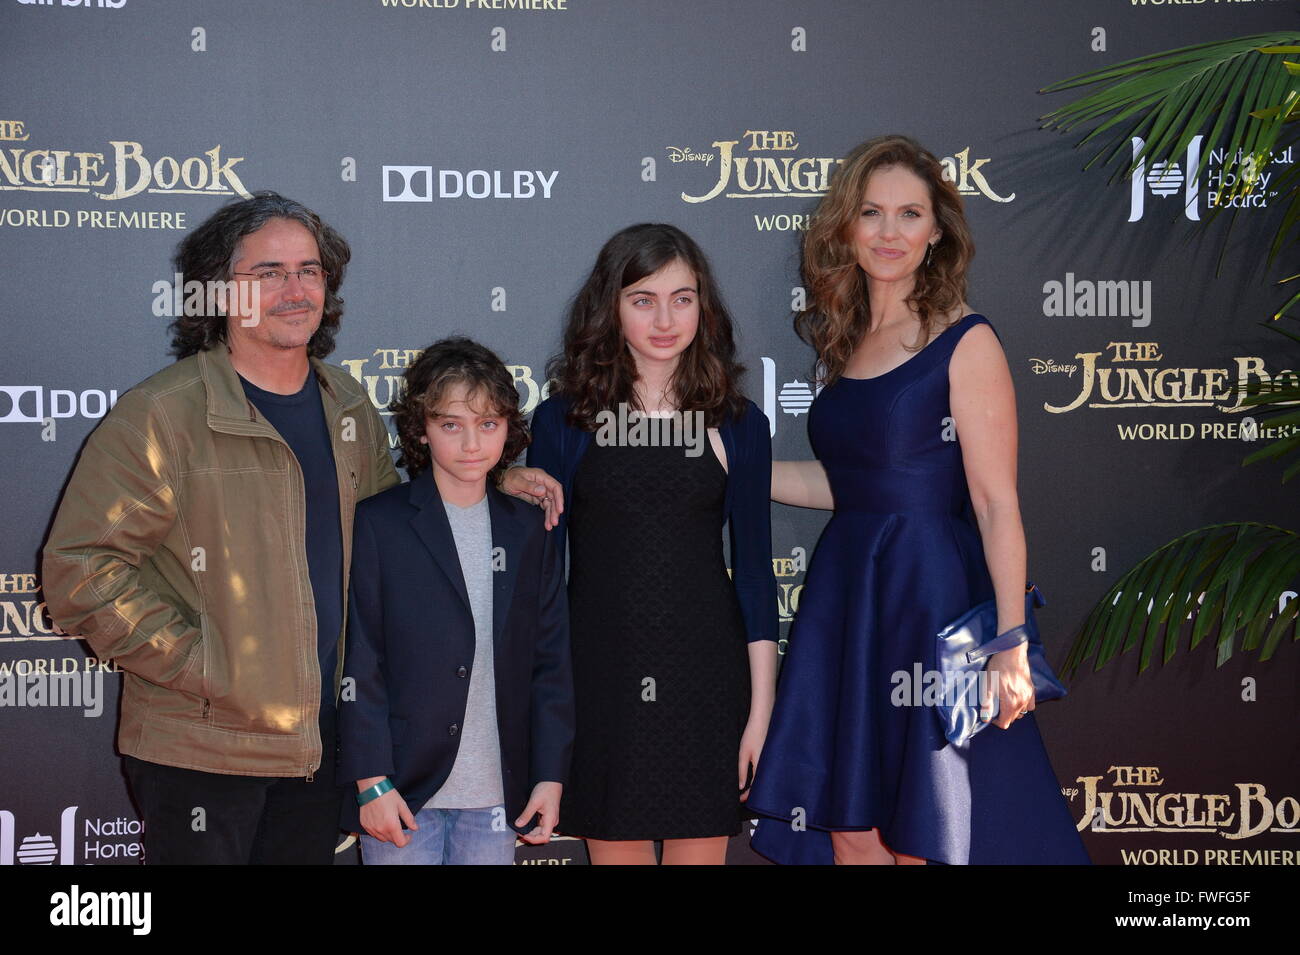 Los Angeles, California, USA. April 4, 2016. Actress Amy Brenneman & husband Brad Silberling & children at the world premiere of 'The Jungle Book' at the El Capitan Theatre, Hollywood.  Credit:  Sarah Stewart/Alamy Live News Stock Photo